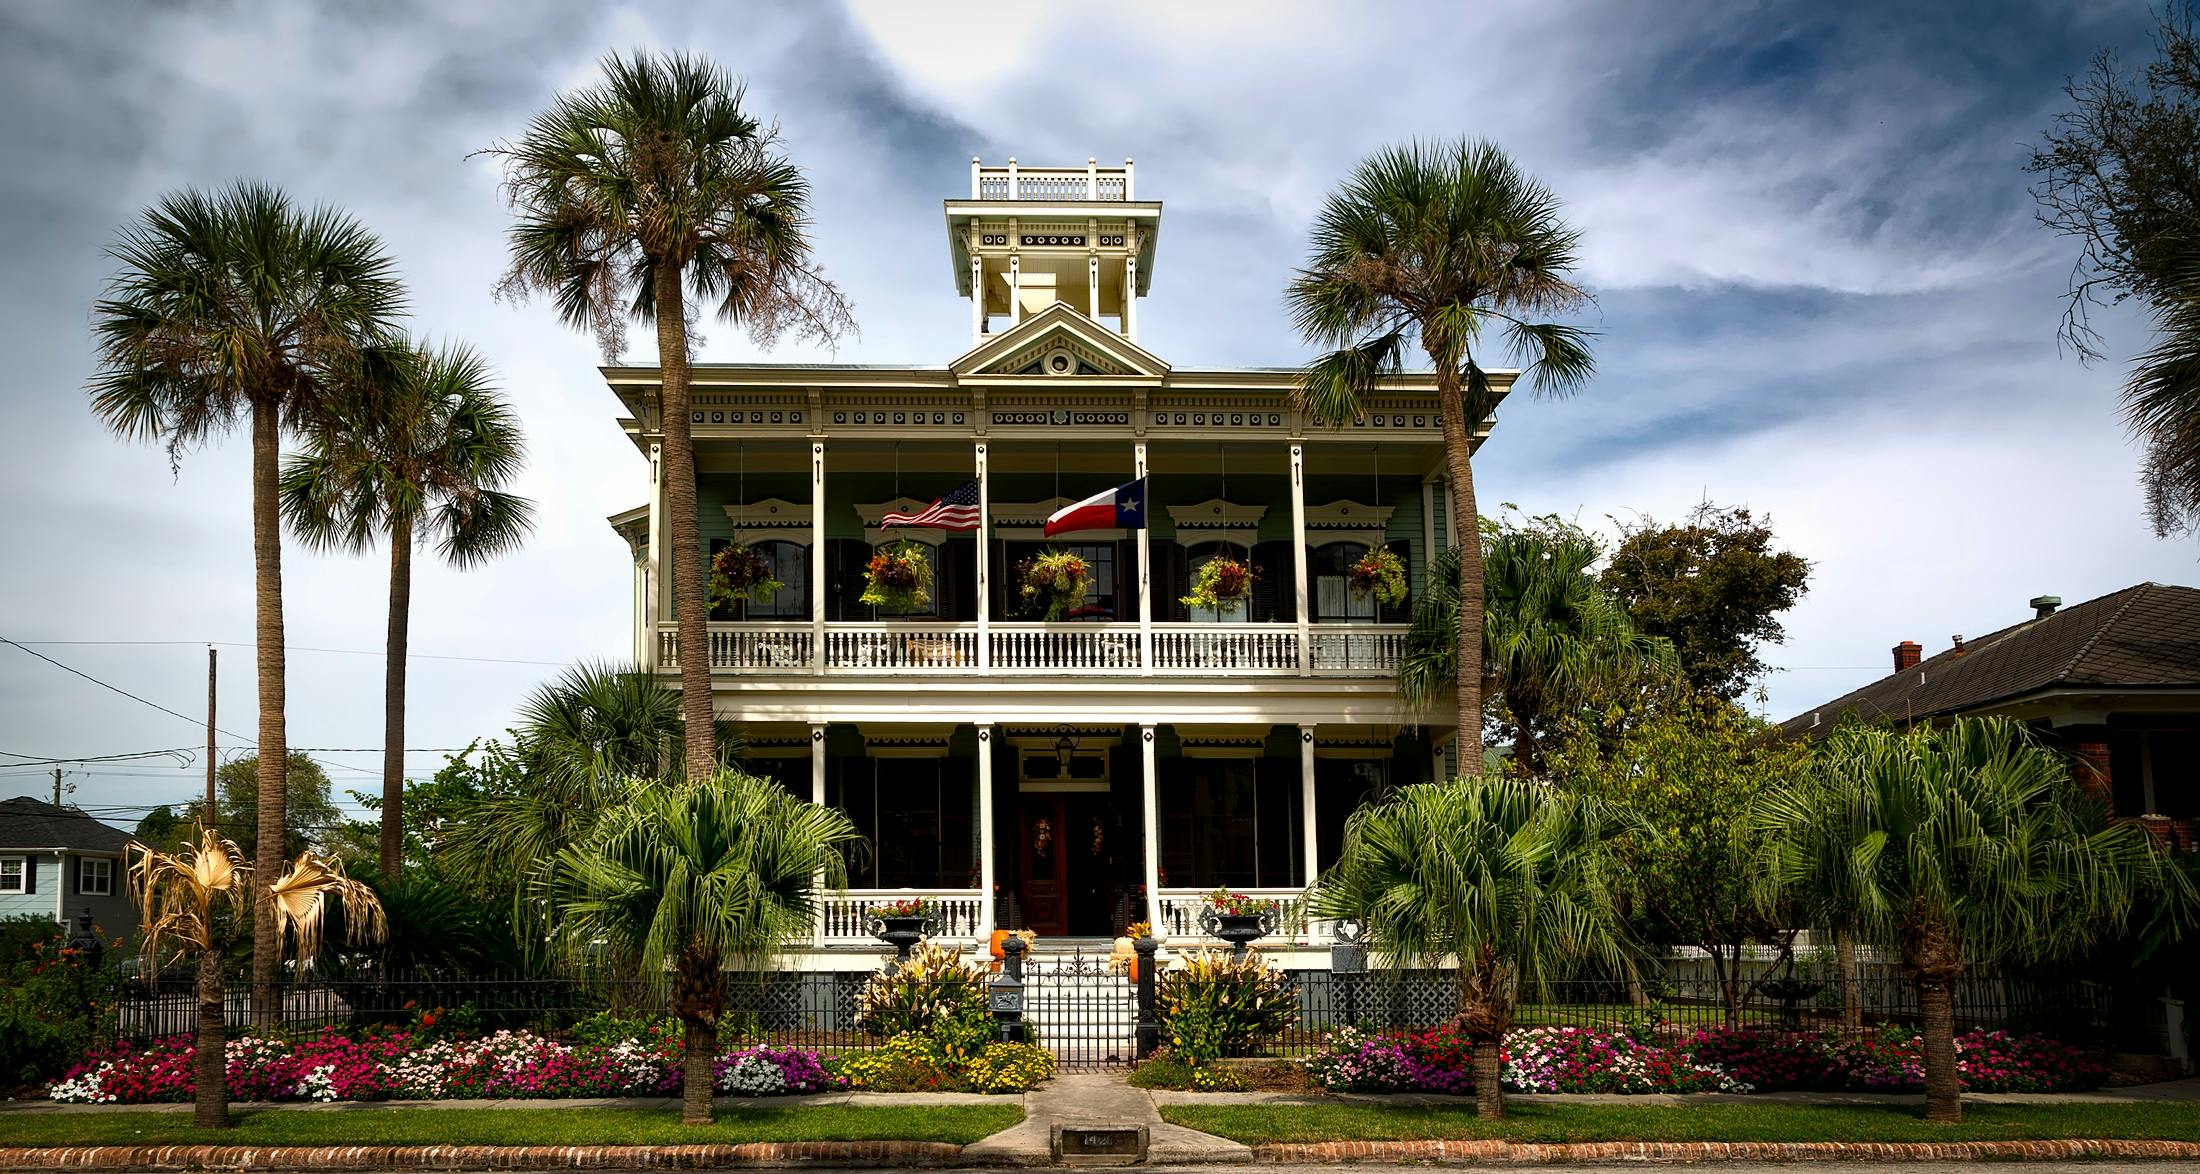 a large house with palm trees in front of it, by Carey Morris, pexels contest winner, southern wildflowers, preserved historical, americana architecture, coastal